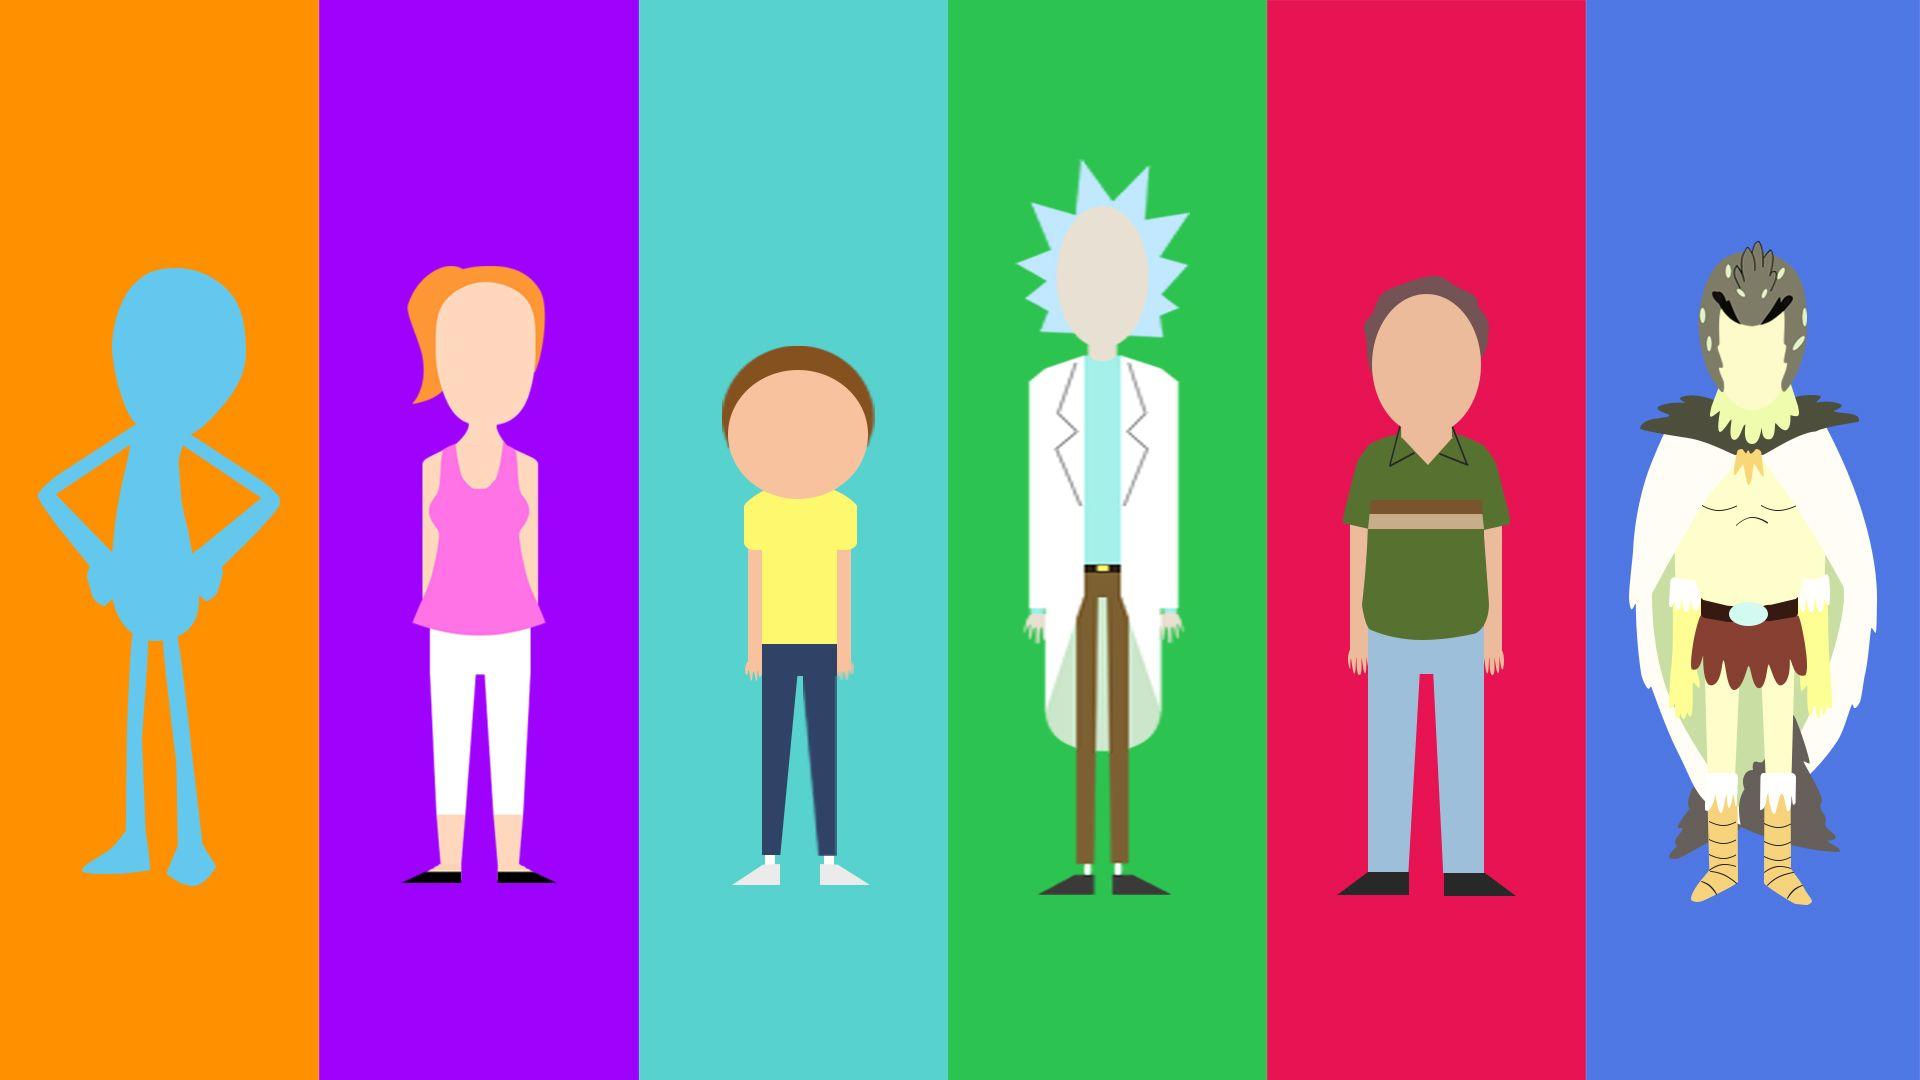 My minimalist Rick and Morty character collection [OC] in 2020